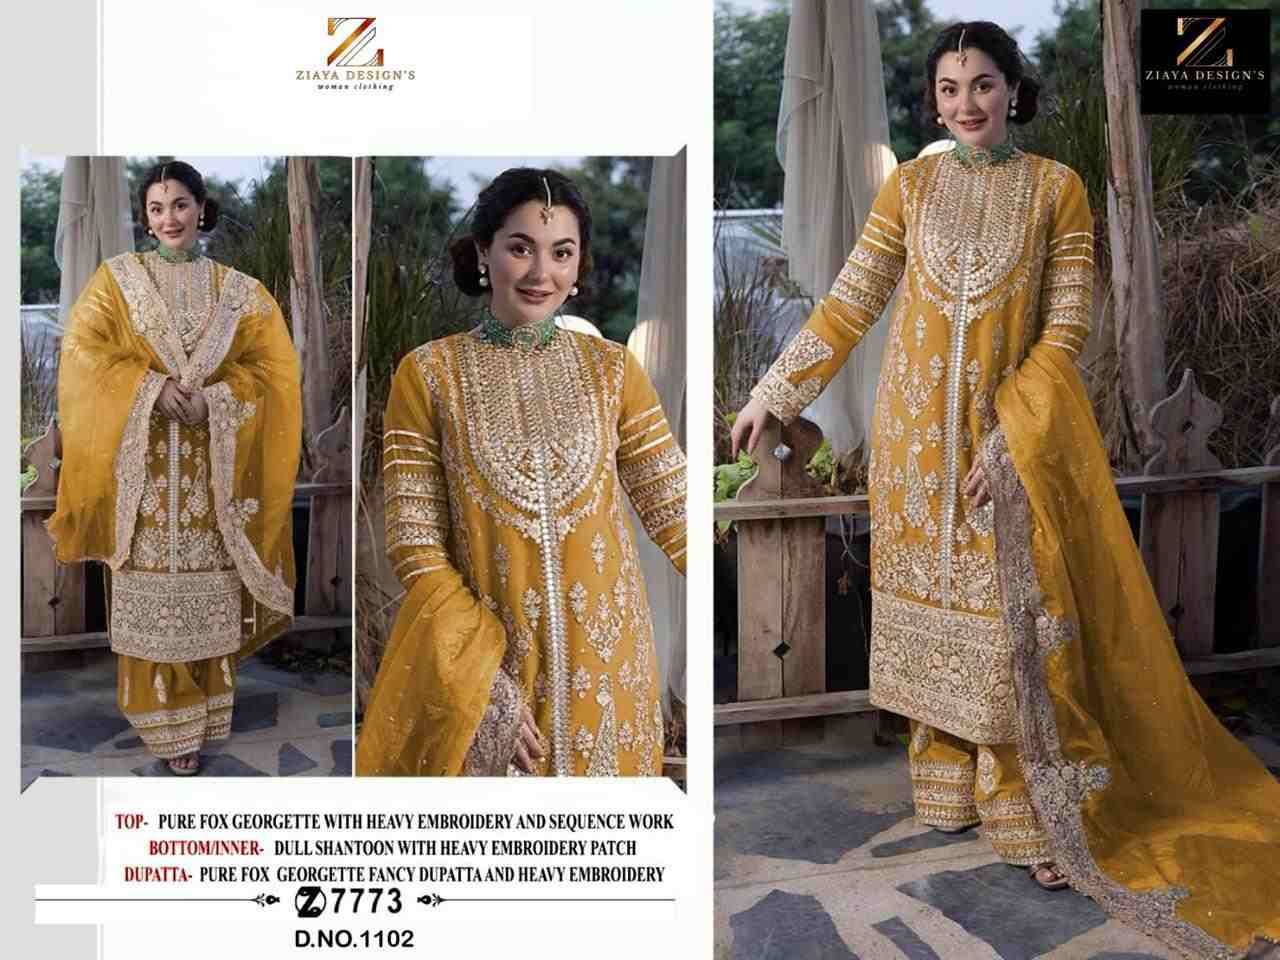 Ziaya Designs 1101 Series By Ziaya Designs 1101 To 1103 Series Beautiful Pakistani Suits Colorful Stylish Fancy Casual Wear & Ethnic Wear Pure Faux Georgette With Embroidered Dresses At Wholesale Price